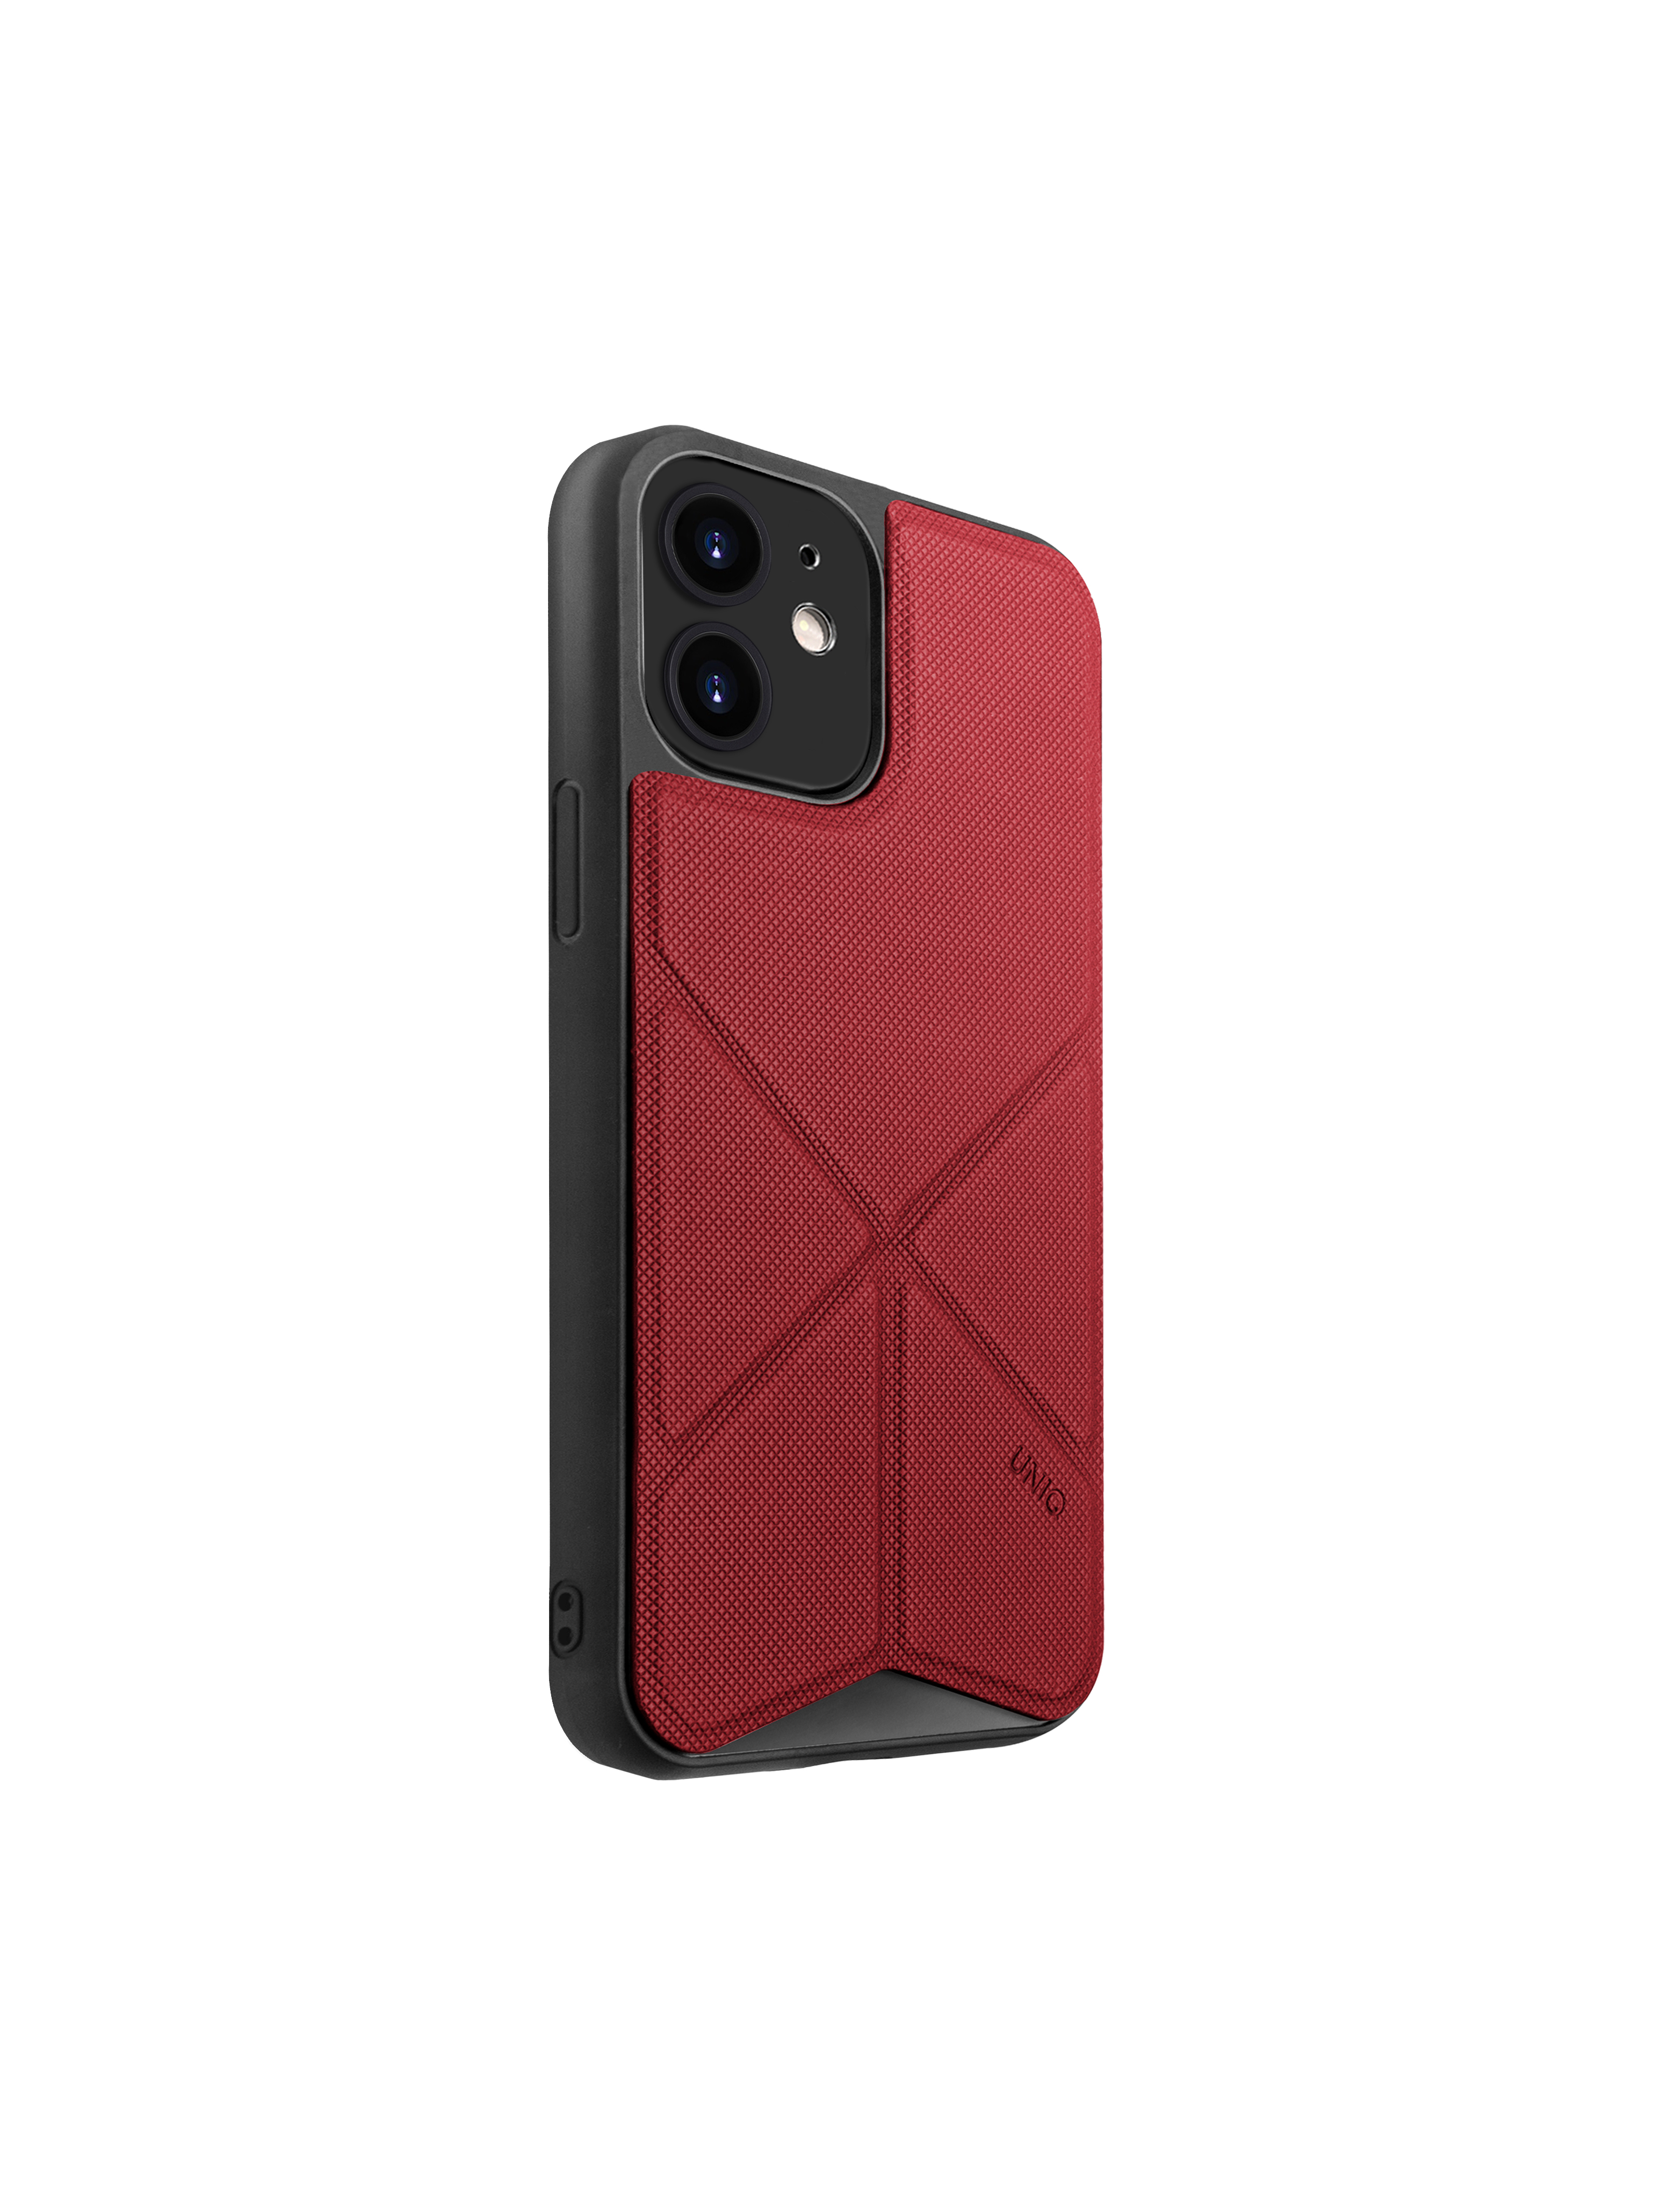 iPhone 12/12 Pro, case transforma, stand up coral, red